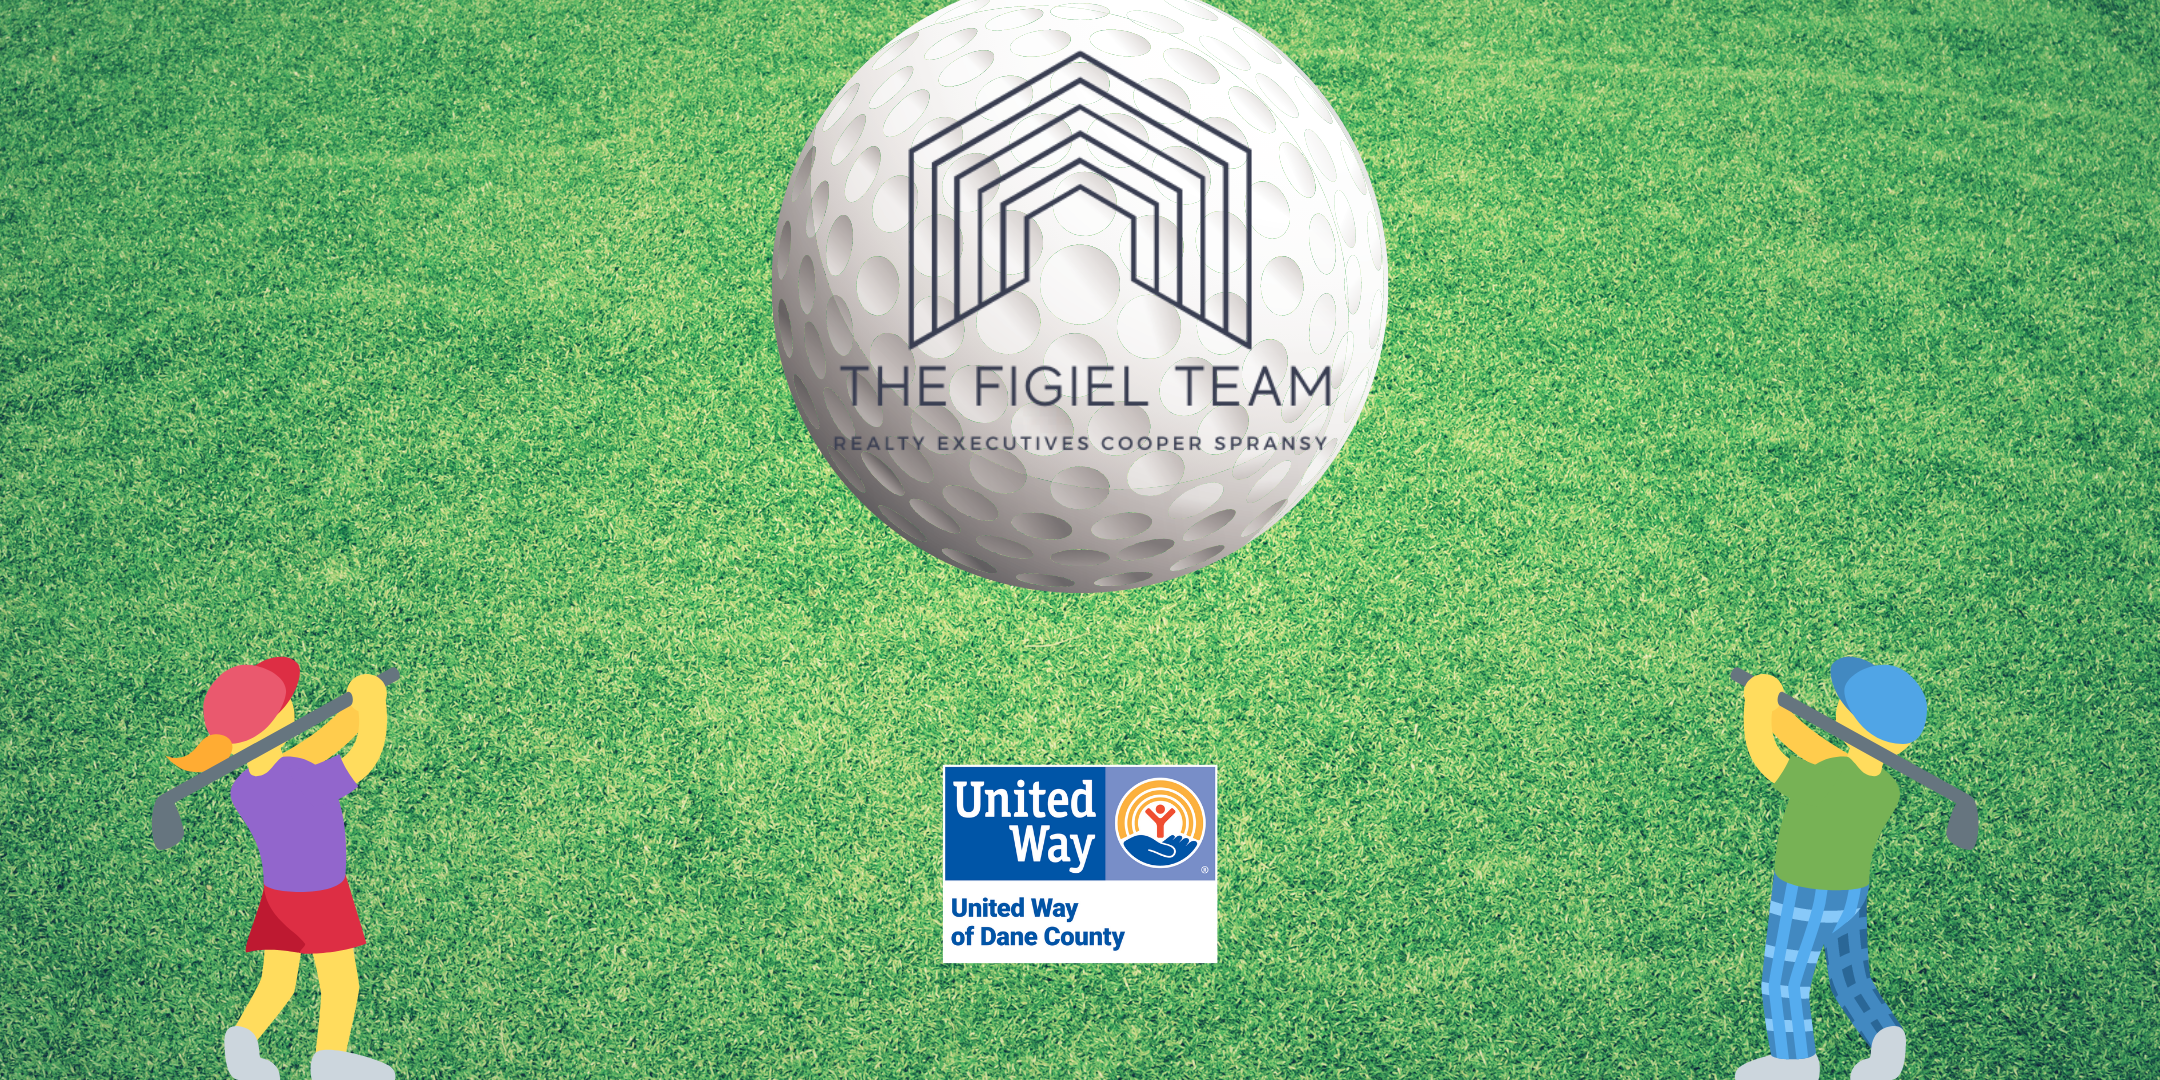 The Figiel Team Charity Golf Outing